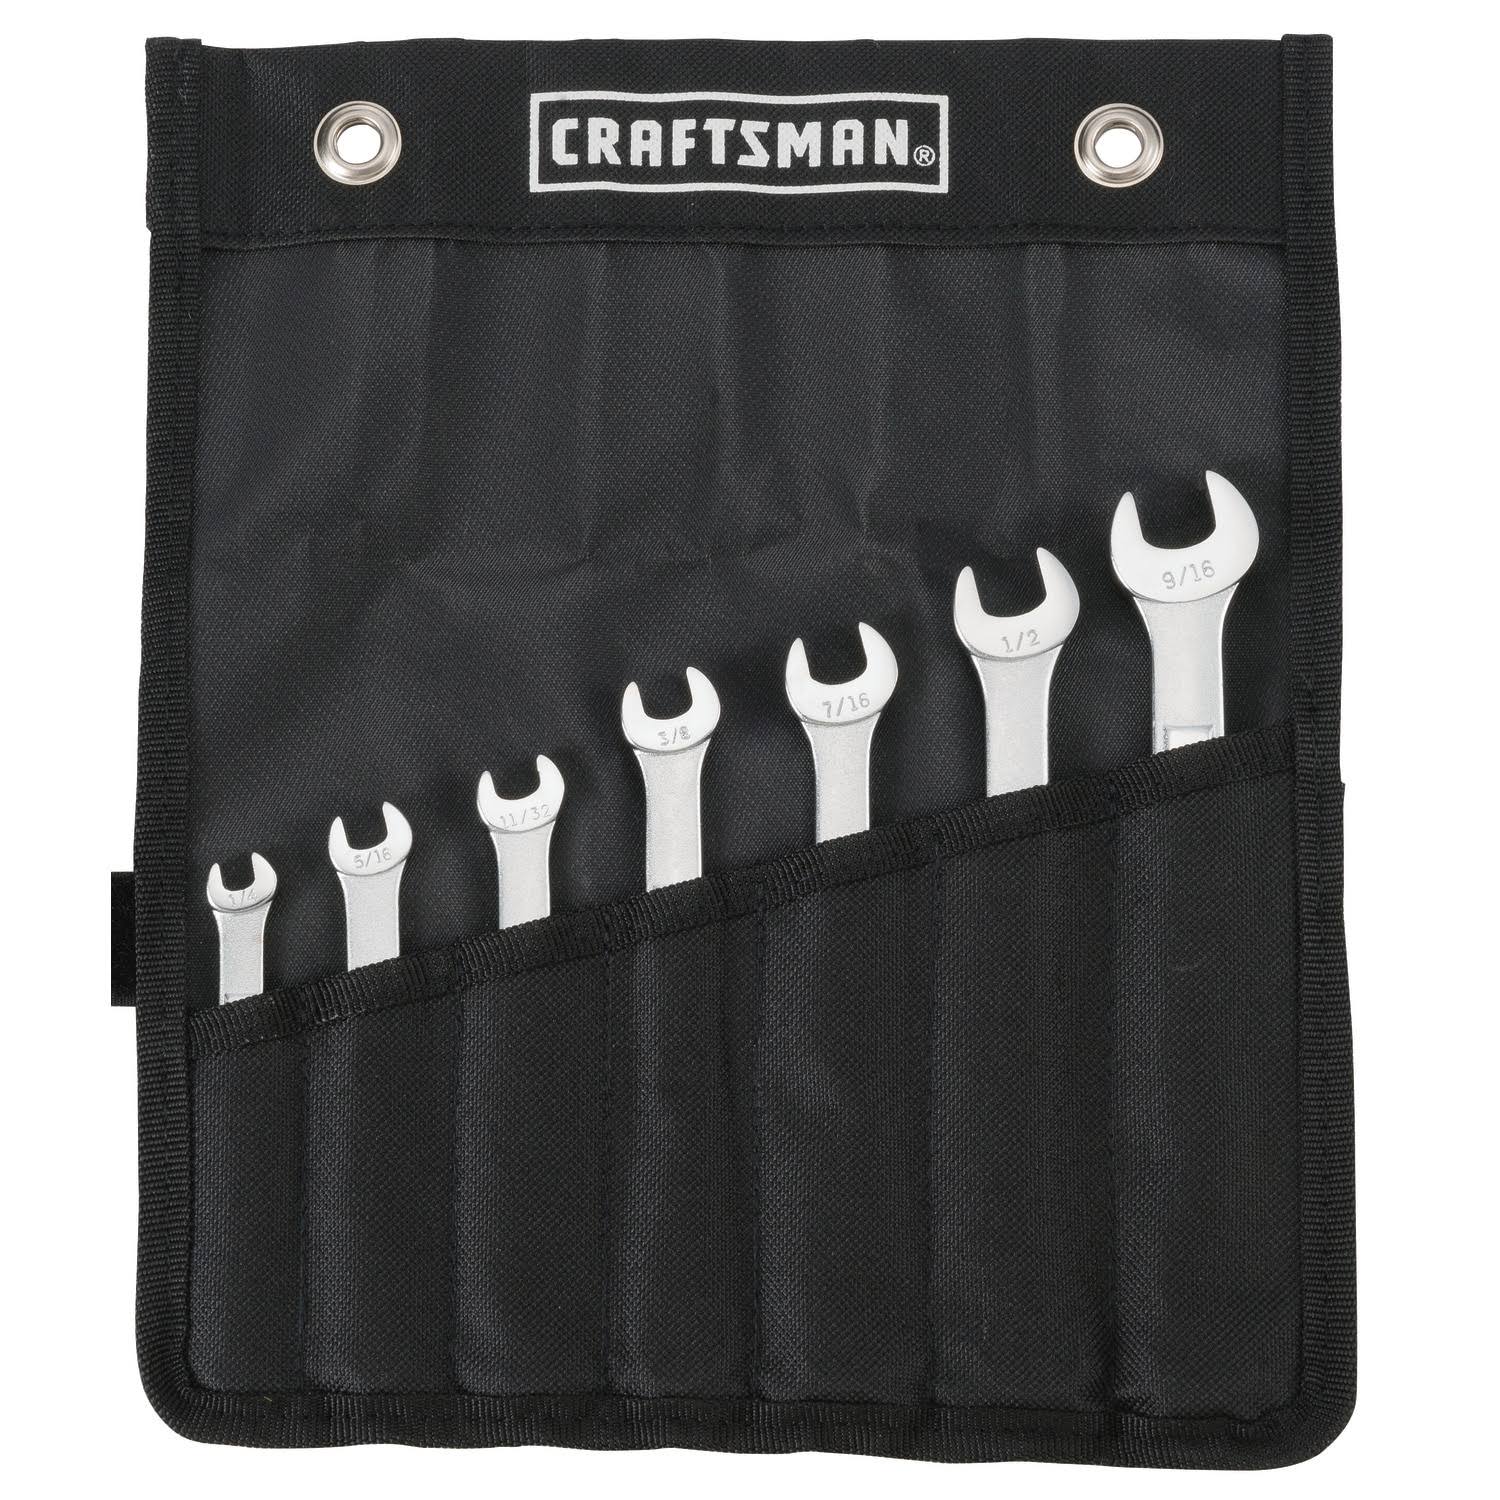 Craftsman SAE Wrench Set in Pouch, 7pc (CMMT21085)